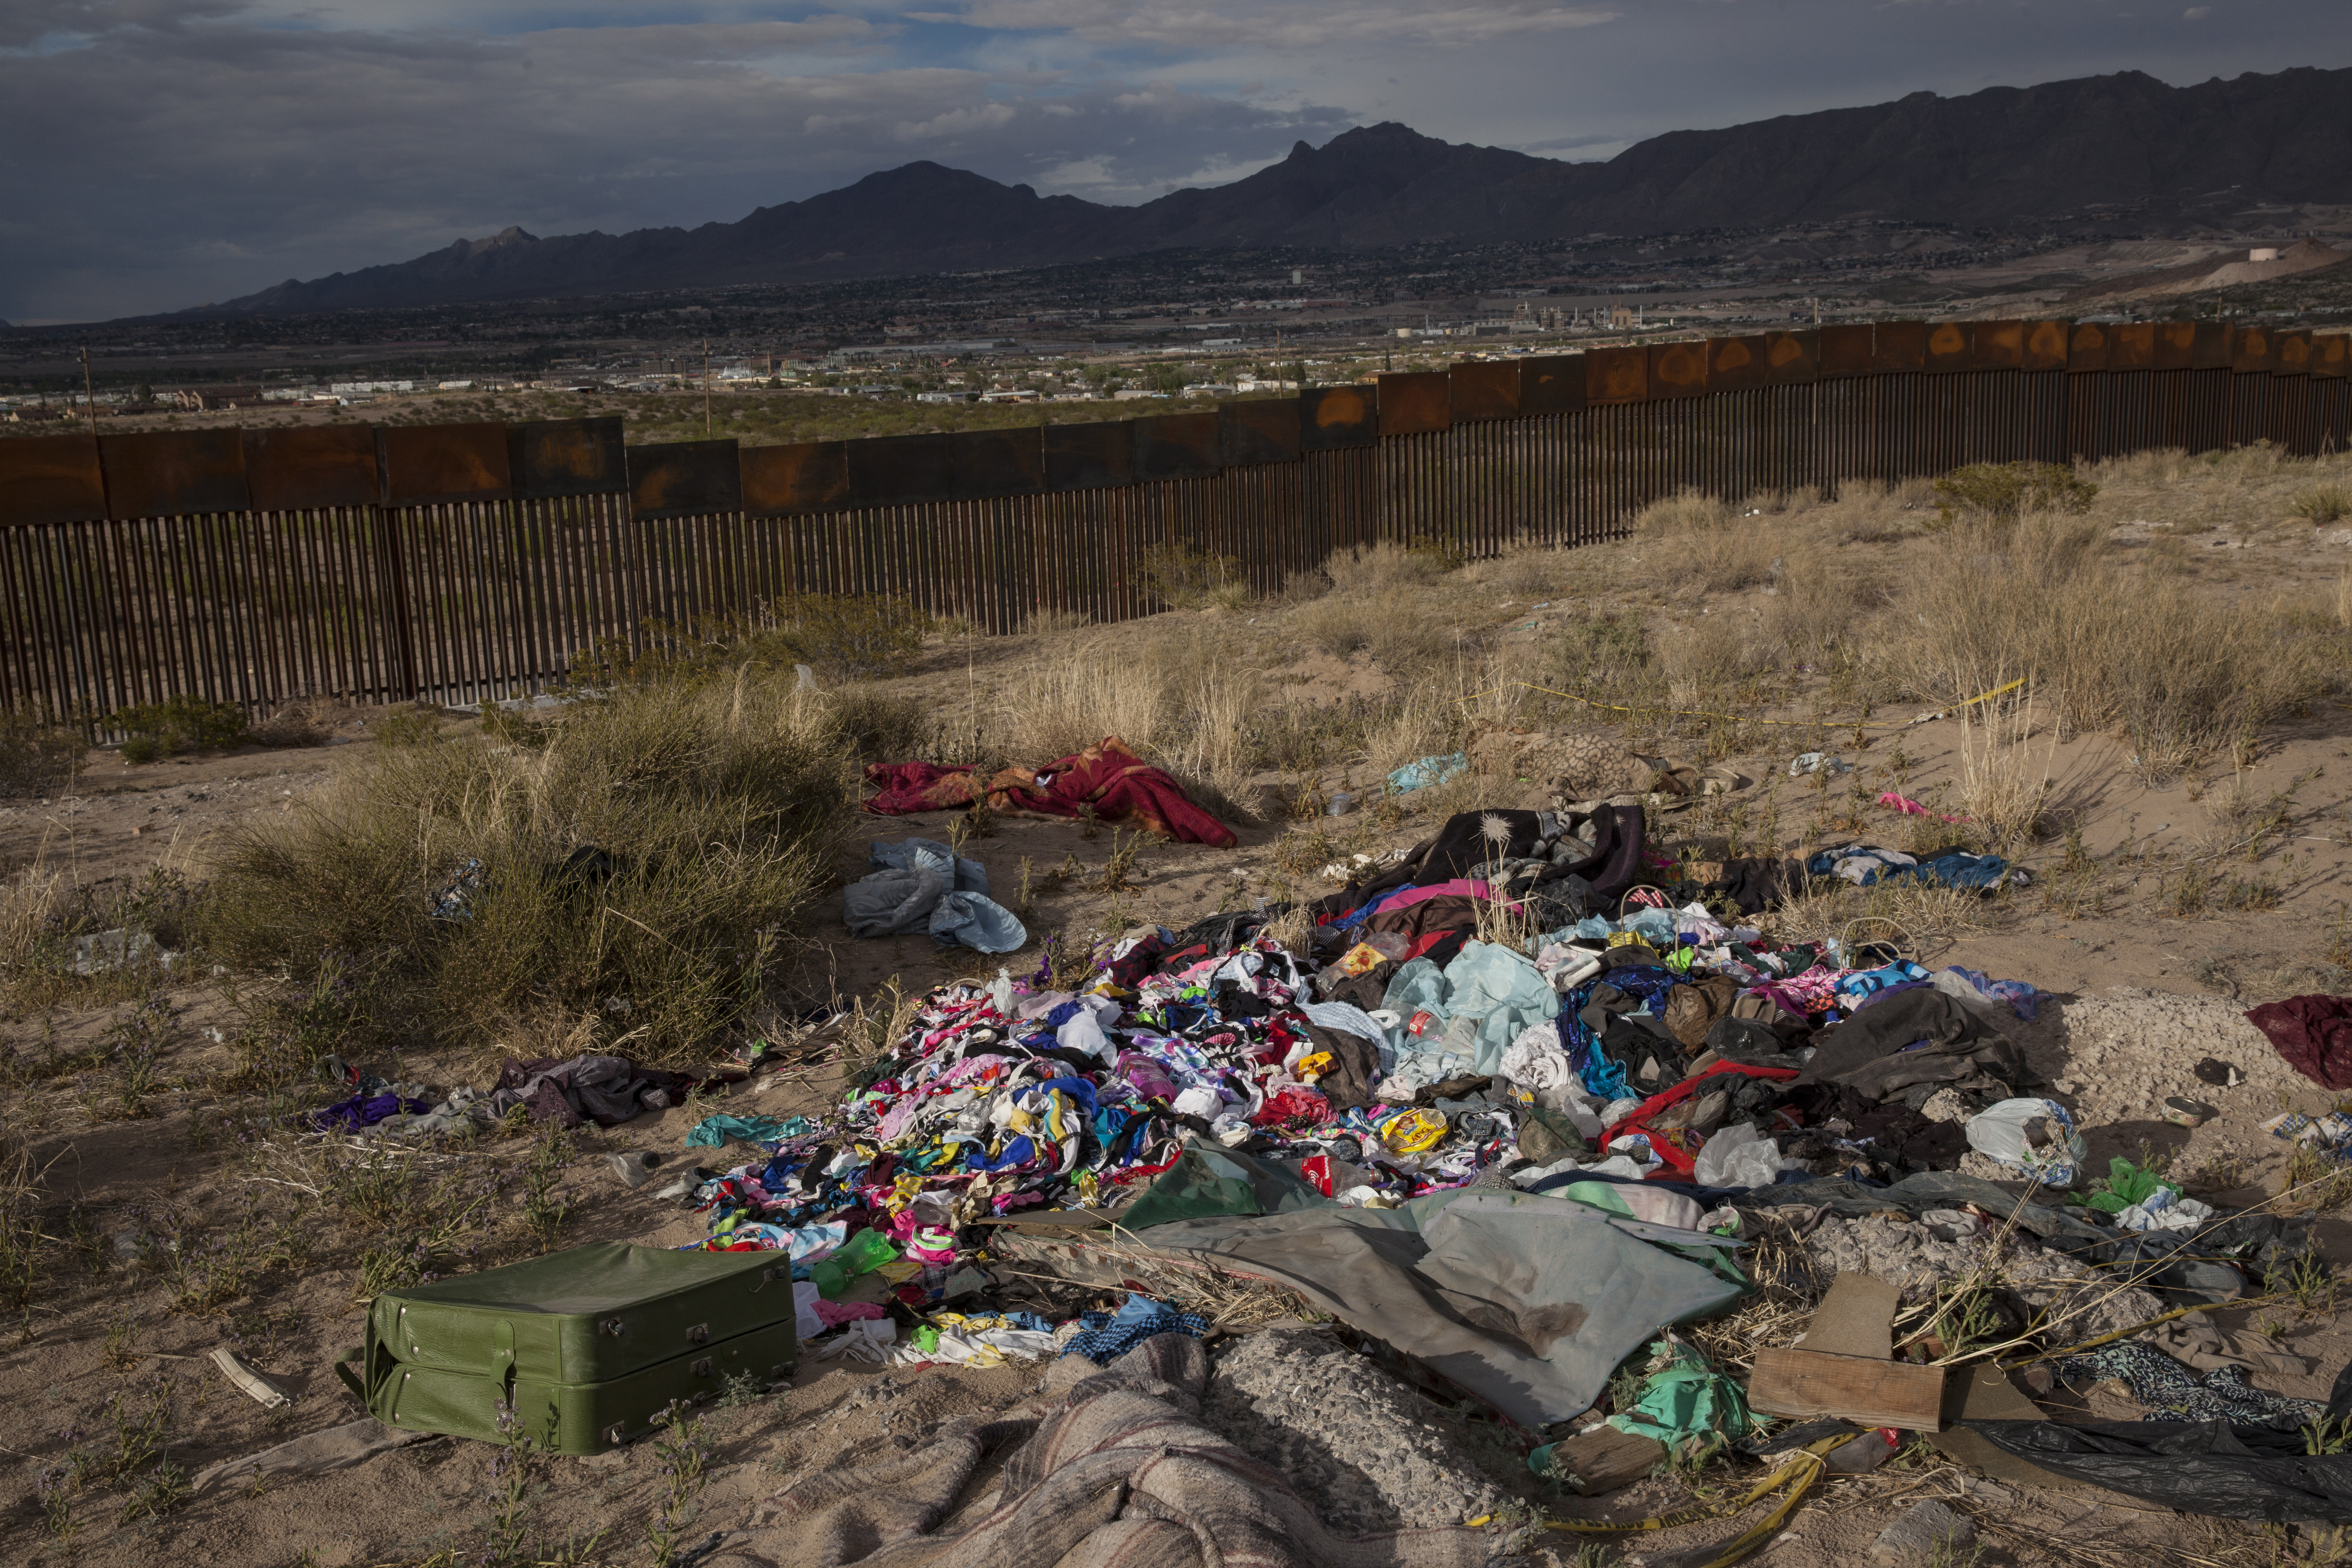 Clothes lay abandoned near a newly erected fence at the U.S.-Mexico border in the Anapra neighborhood of Ciudad Juarez, Mexico, Wednesday, March 29, 2017, across from Sunland Park, New Mexico. Residents of Anapra, a neighborhood anchored to the dunes, have fought to get running water, electricity and some paved streets in recent years. (AP Photo/Rodrigo Abd)